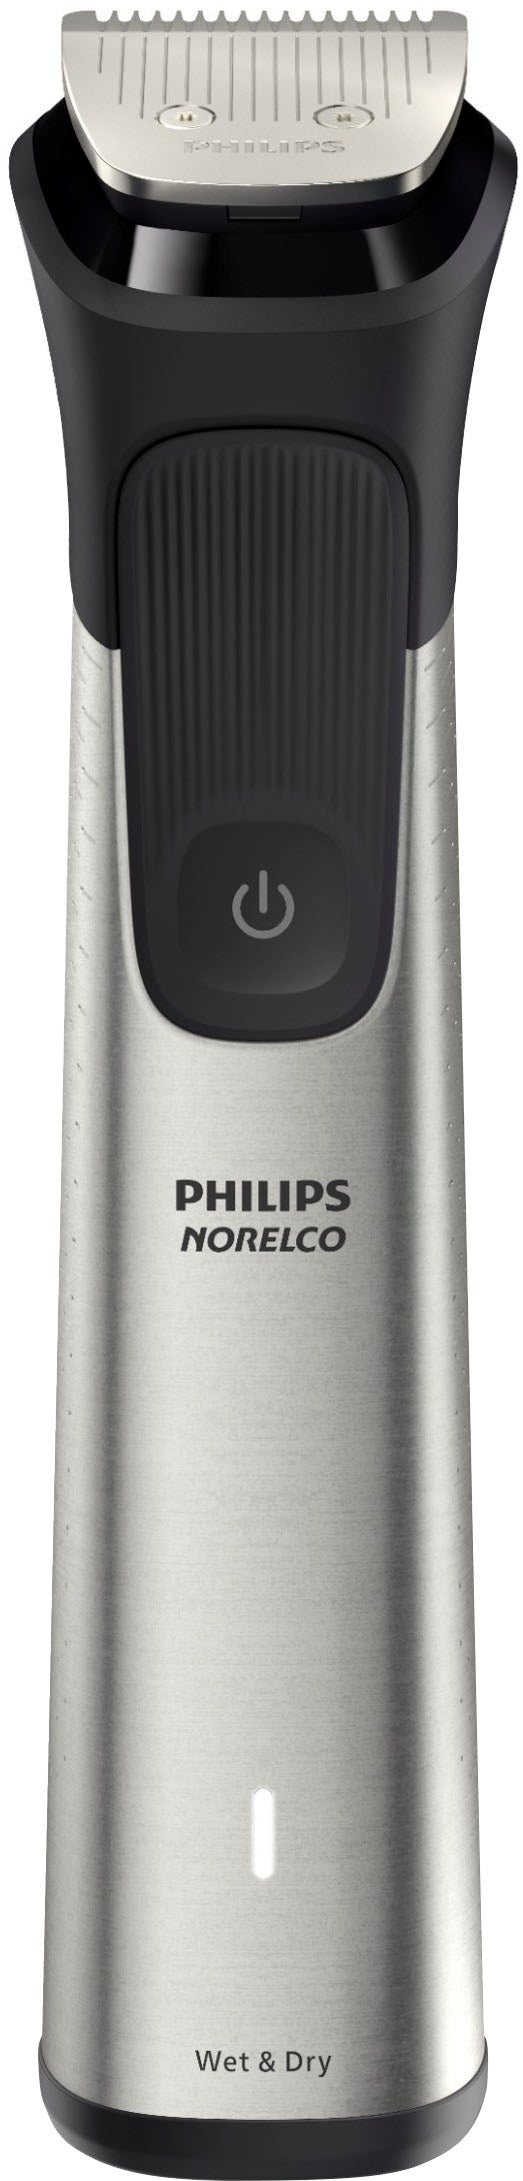 Philips Norelco - Philips Norelco, Multigroom Series 7000, Mens Grooming Kit with Trimmer,  MG7910/49 - Silver_2